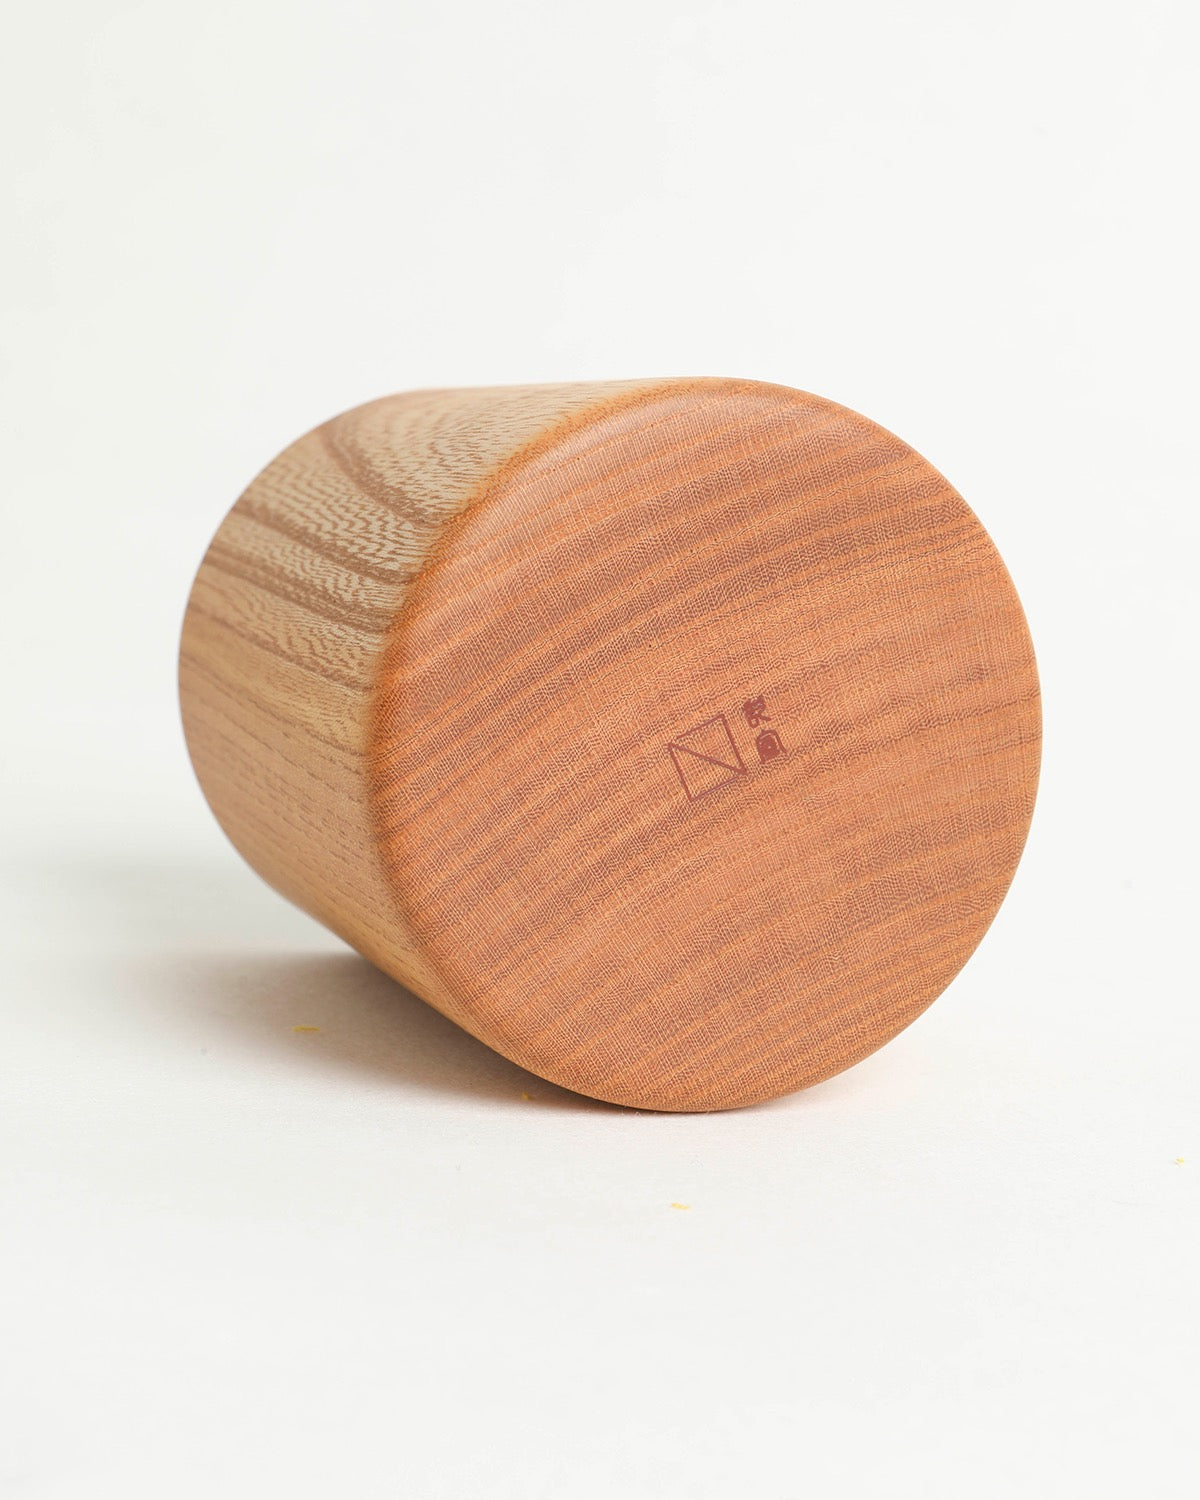 SAIBI WOODEN CUP [M]